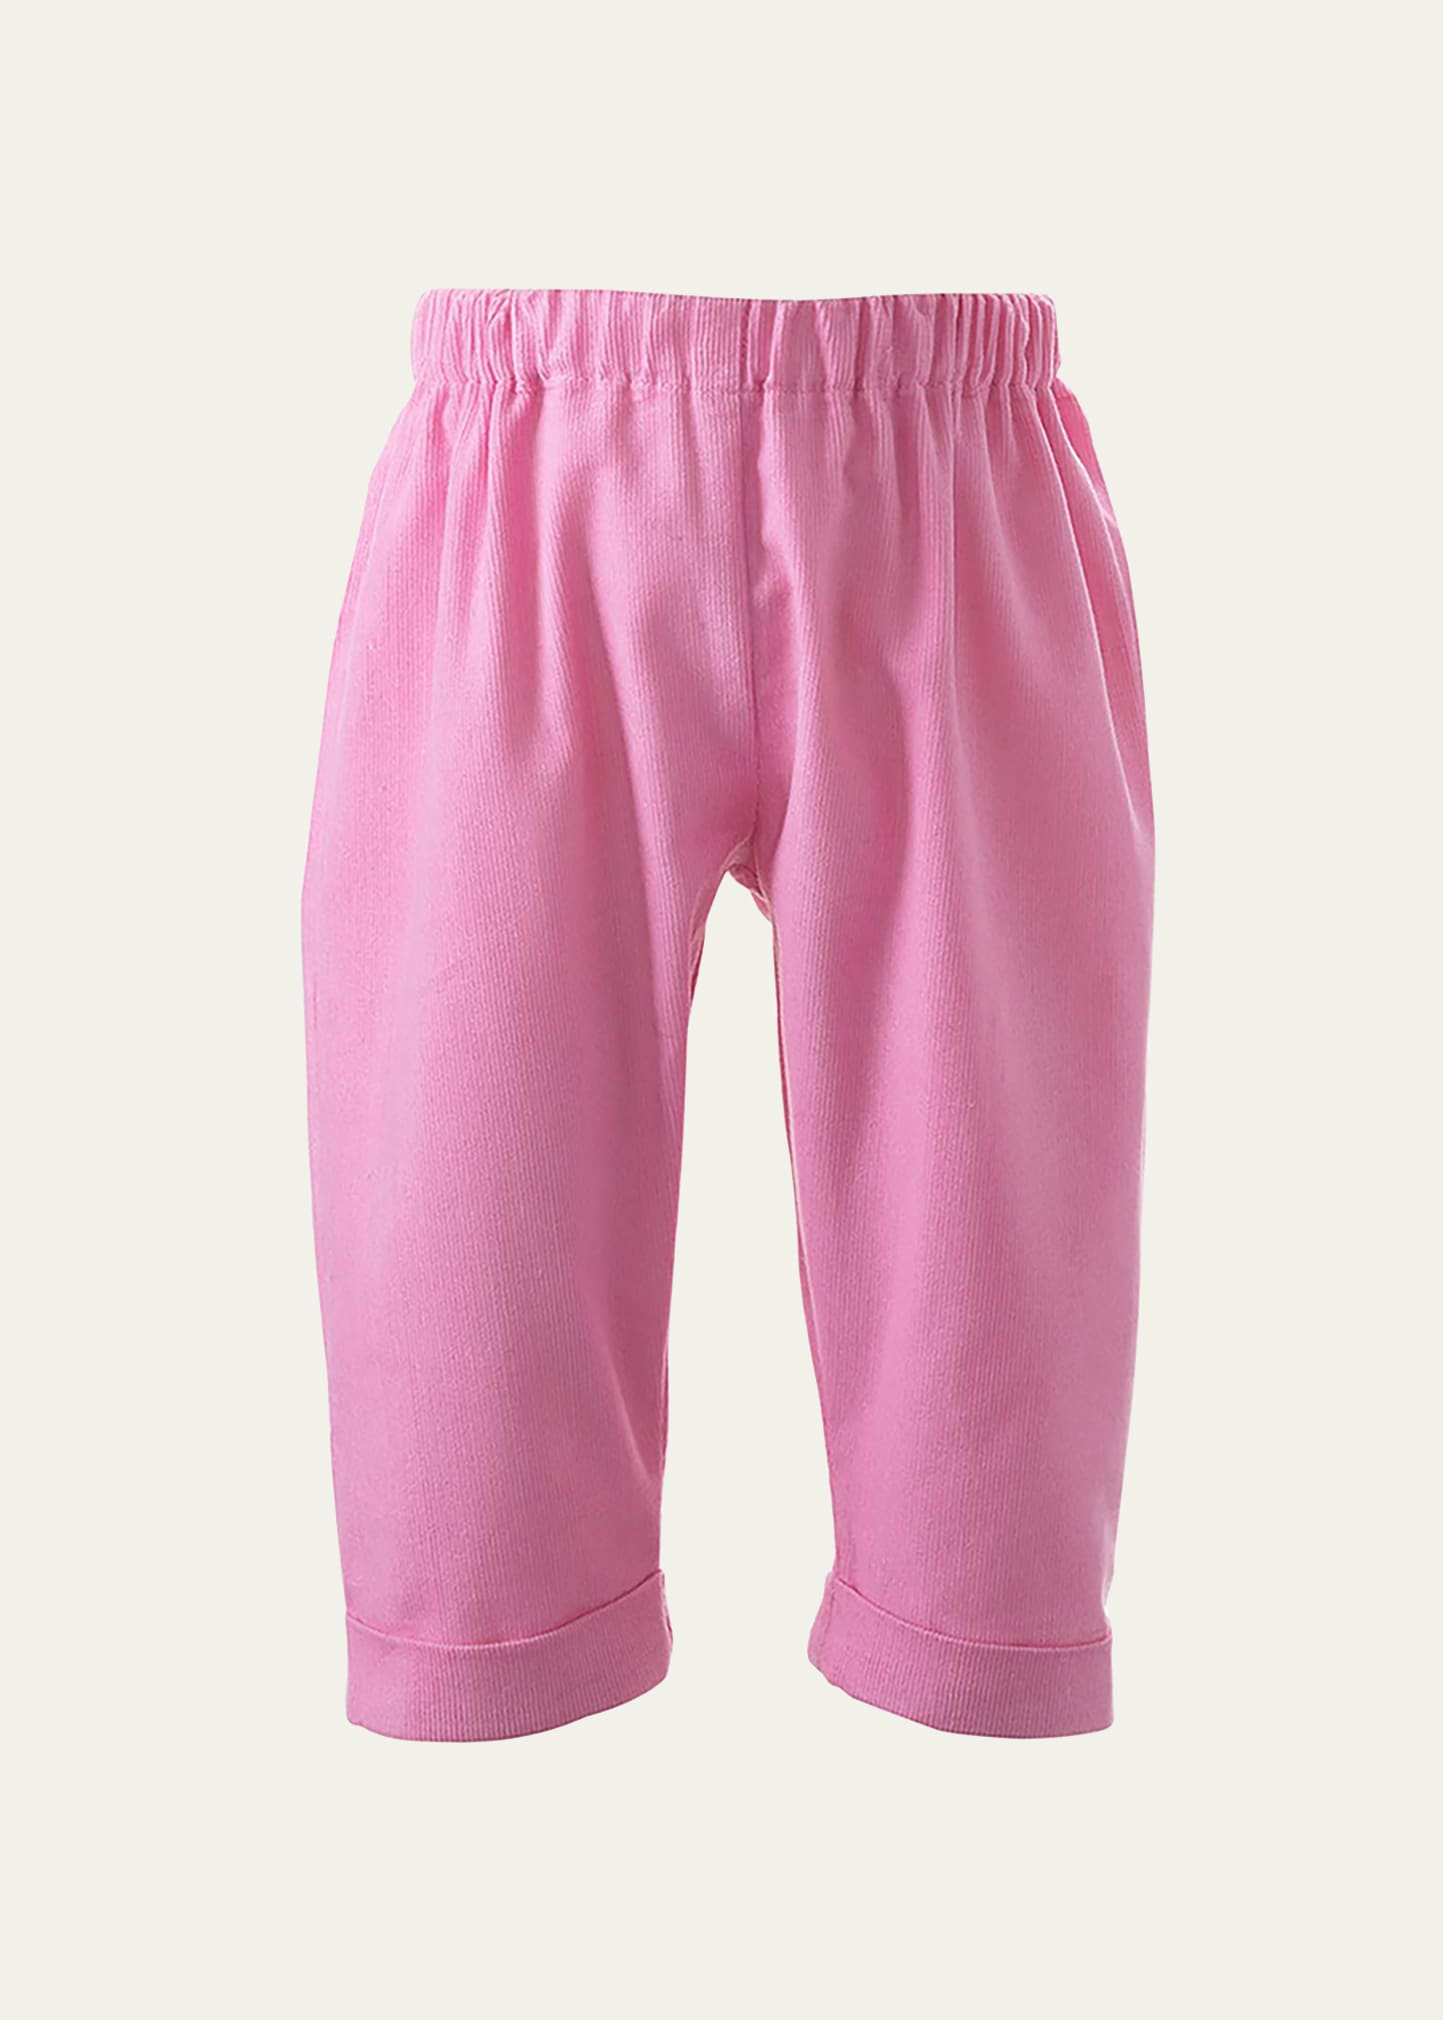 Girl's Corduroy Trousers, Size 6M-24M